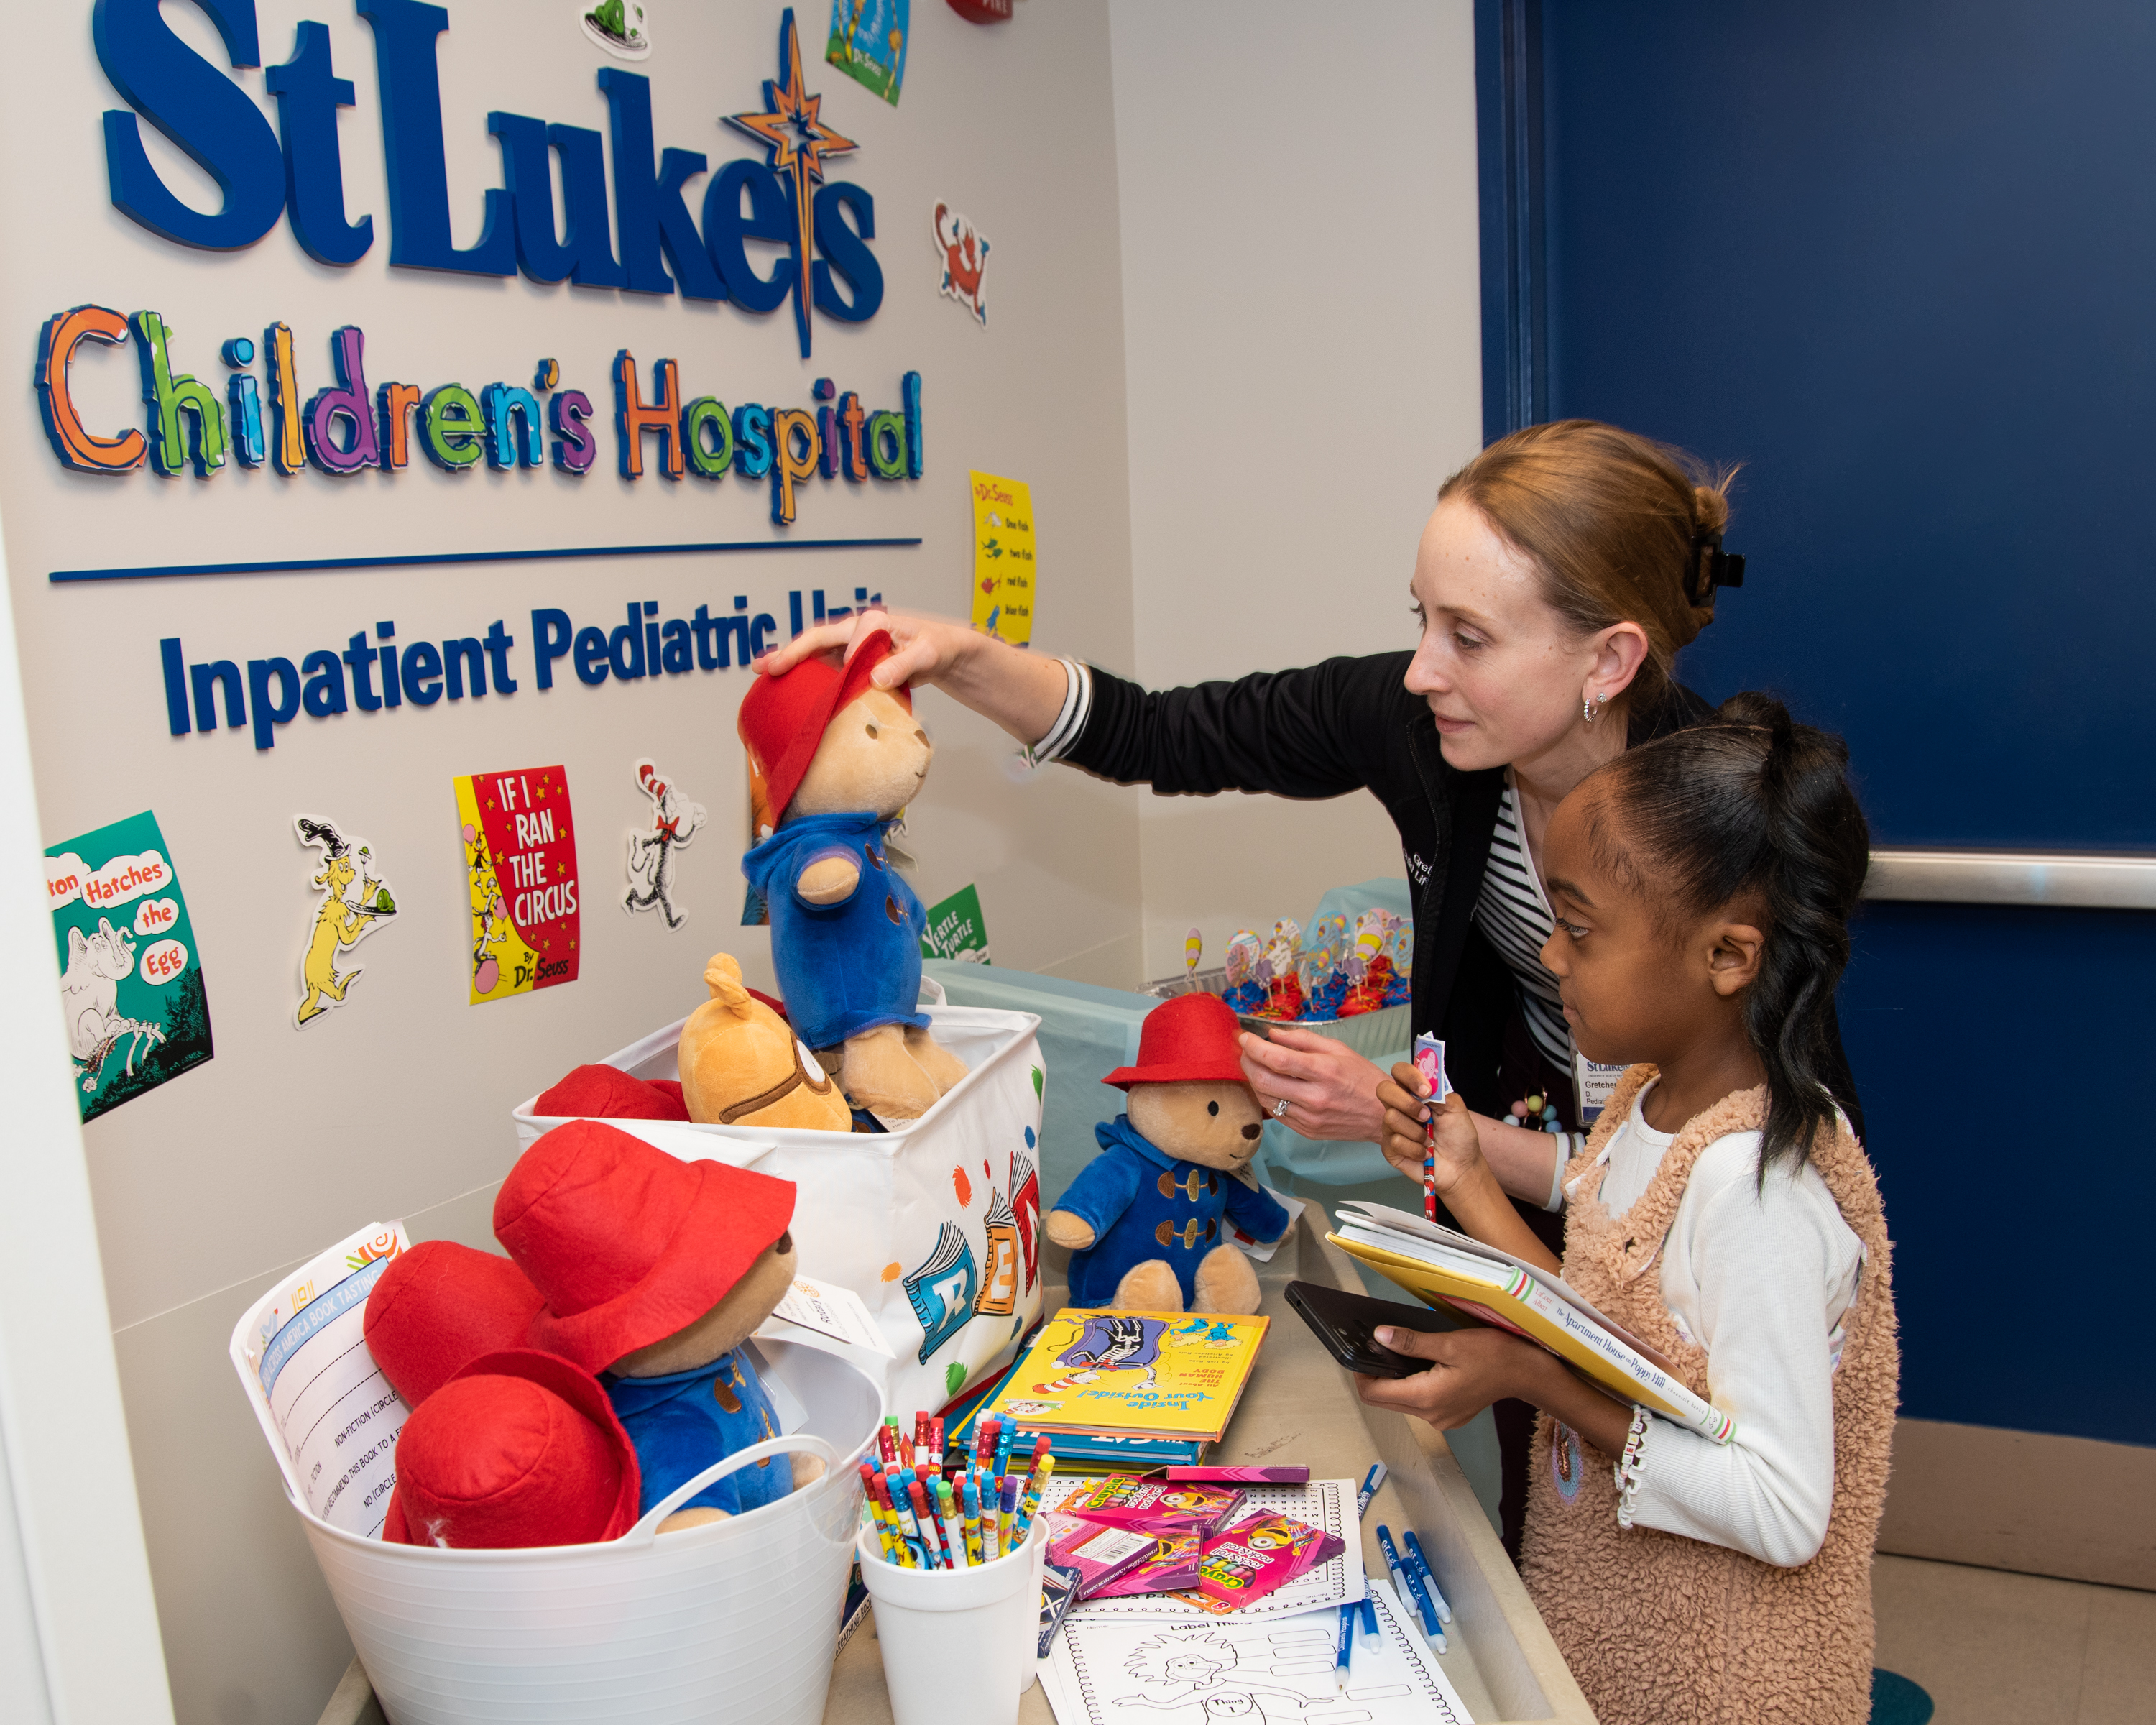 Gretchen Duffy, Coordinator for Child Life Services, helps Leah Correa Cora of Bethlehem choose a book and stuffed animal